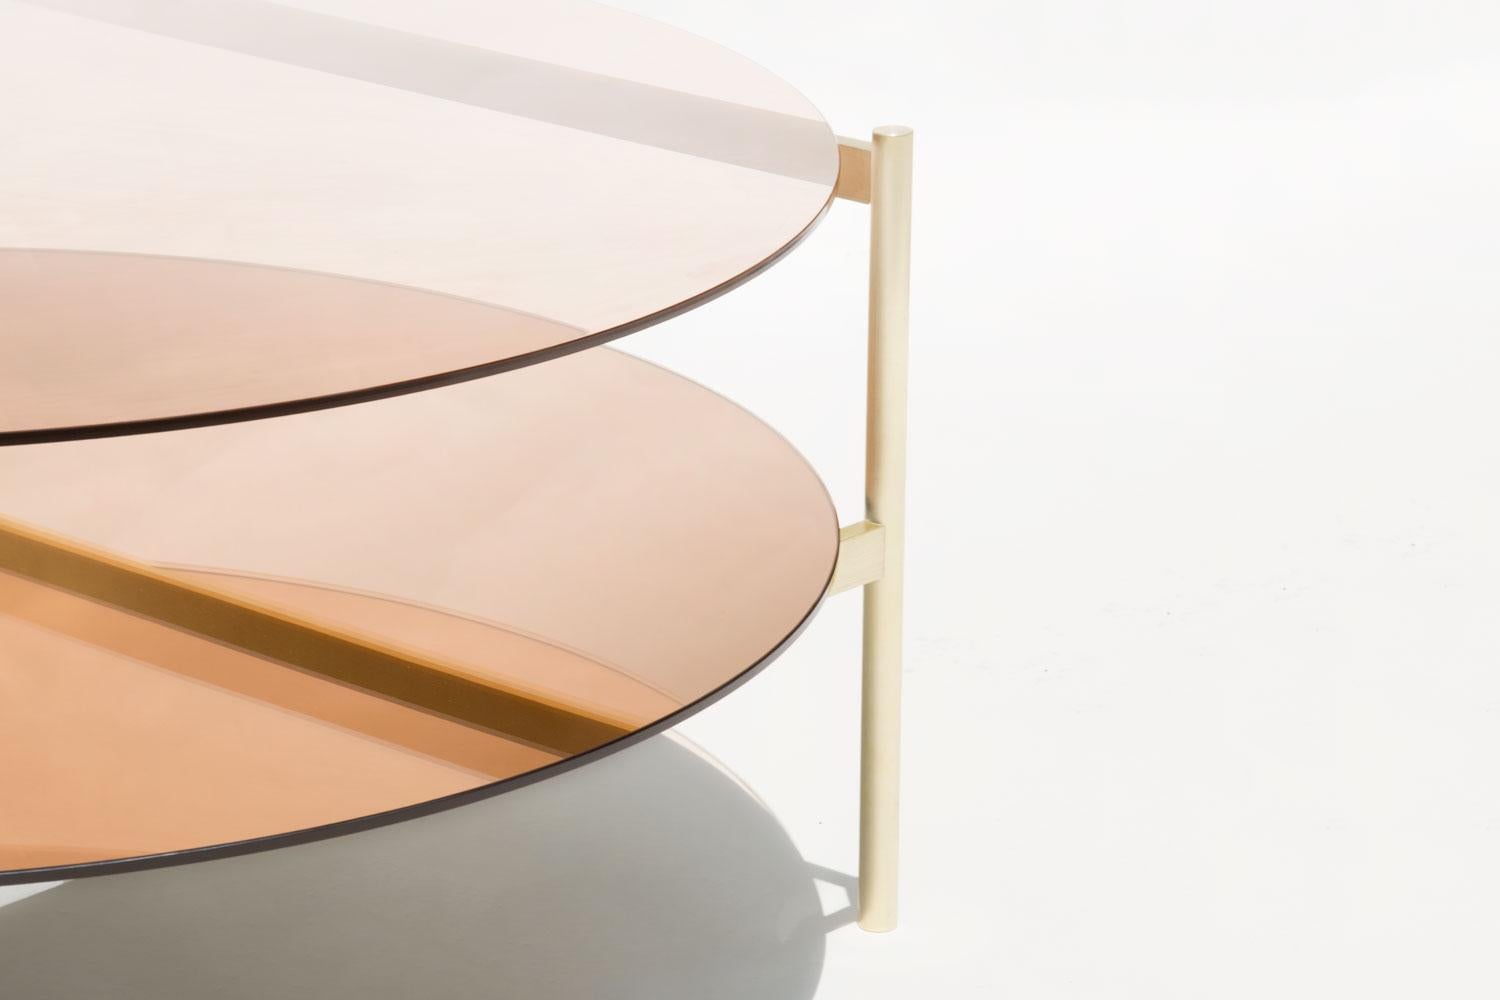 Made to order. Please allow 6 weeks for production.

Brass Frame / Rose Glass / Rose Mirror

The Duotone Furniture series is based on a modular hardware system that pairs sturdy construction with visual lightness and a range of potential